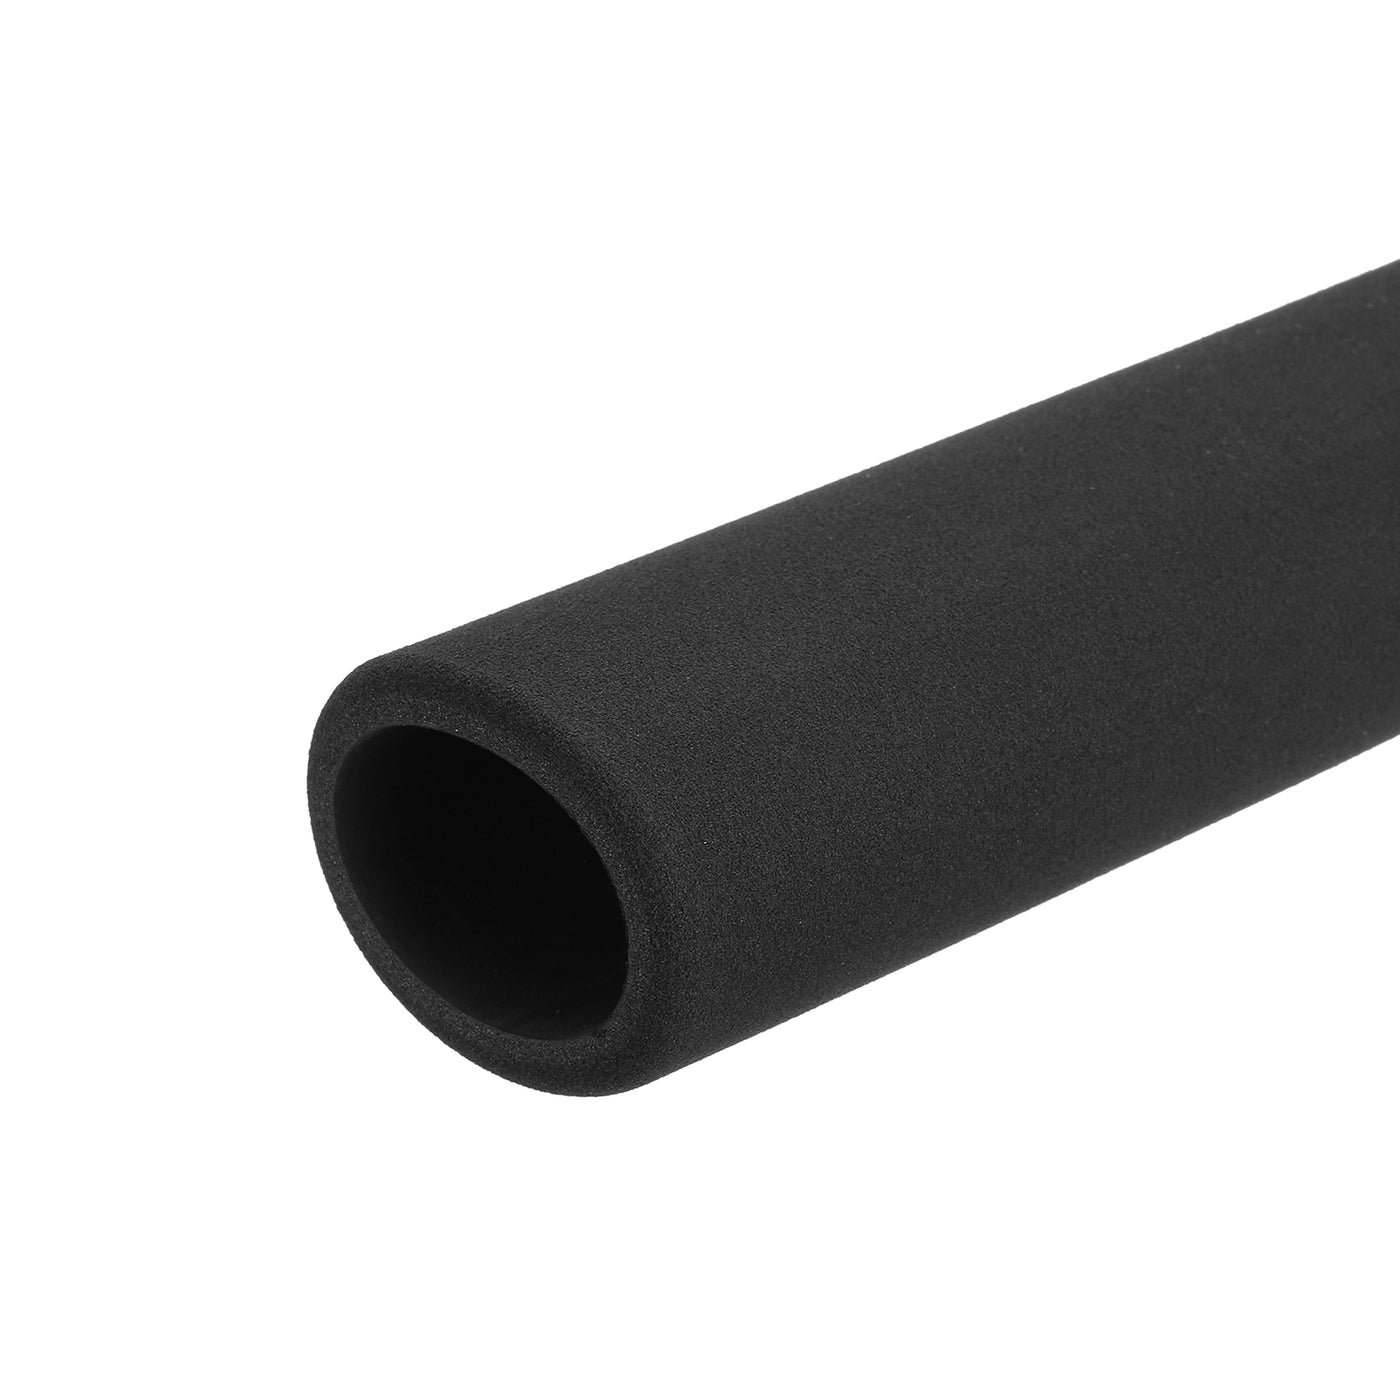 uxcell Uxcell Pipe Insulation Tube Foam Tubing for Handle Grip Support 35mm ID 47mm OD 395mm Heat Preservation Black